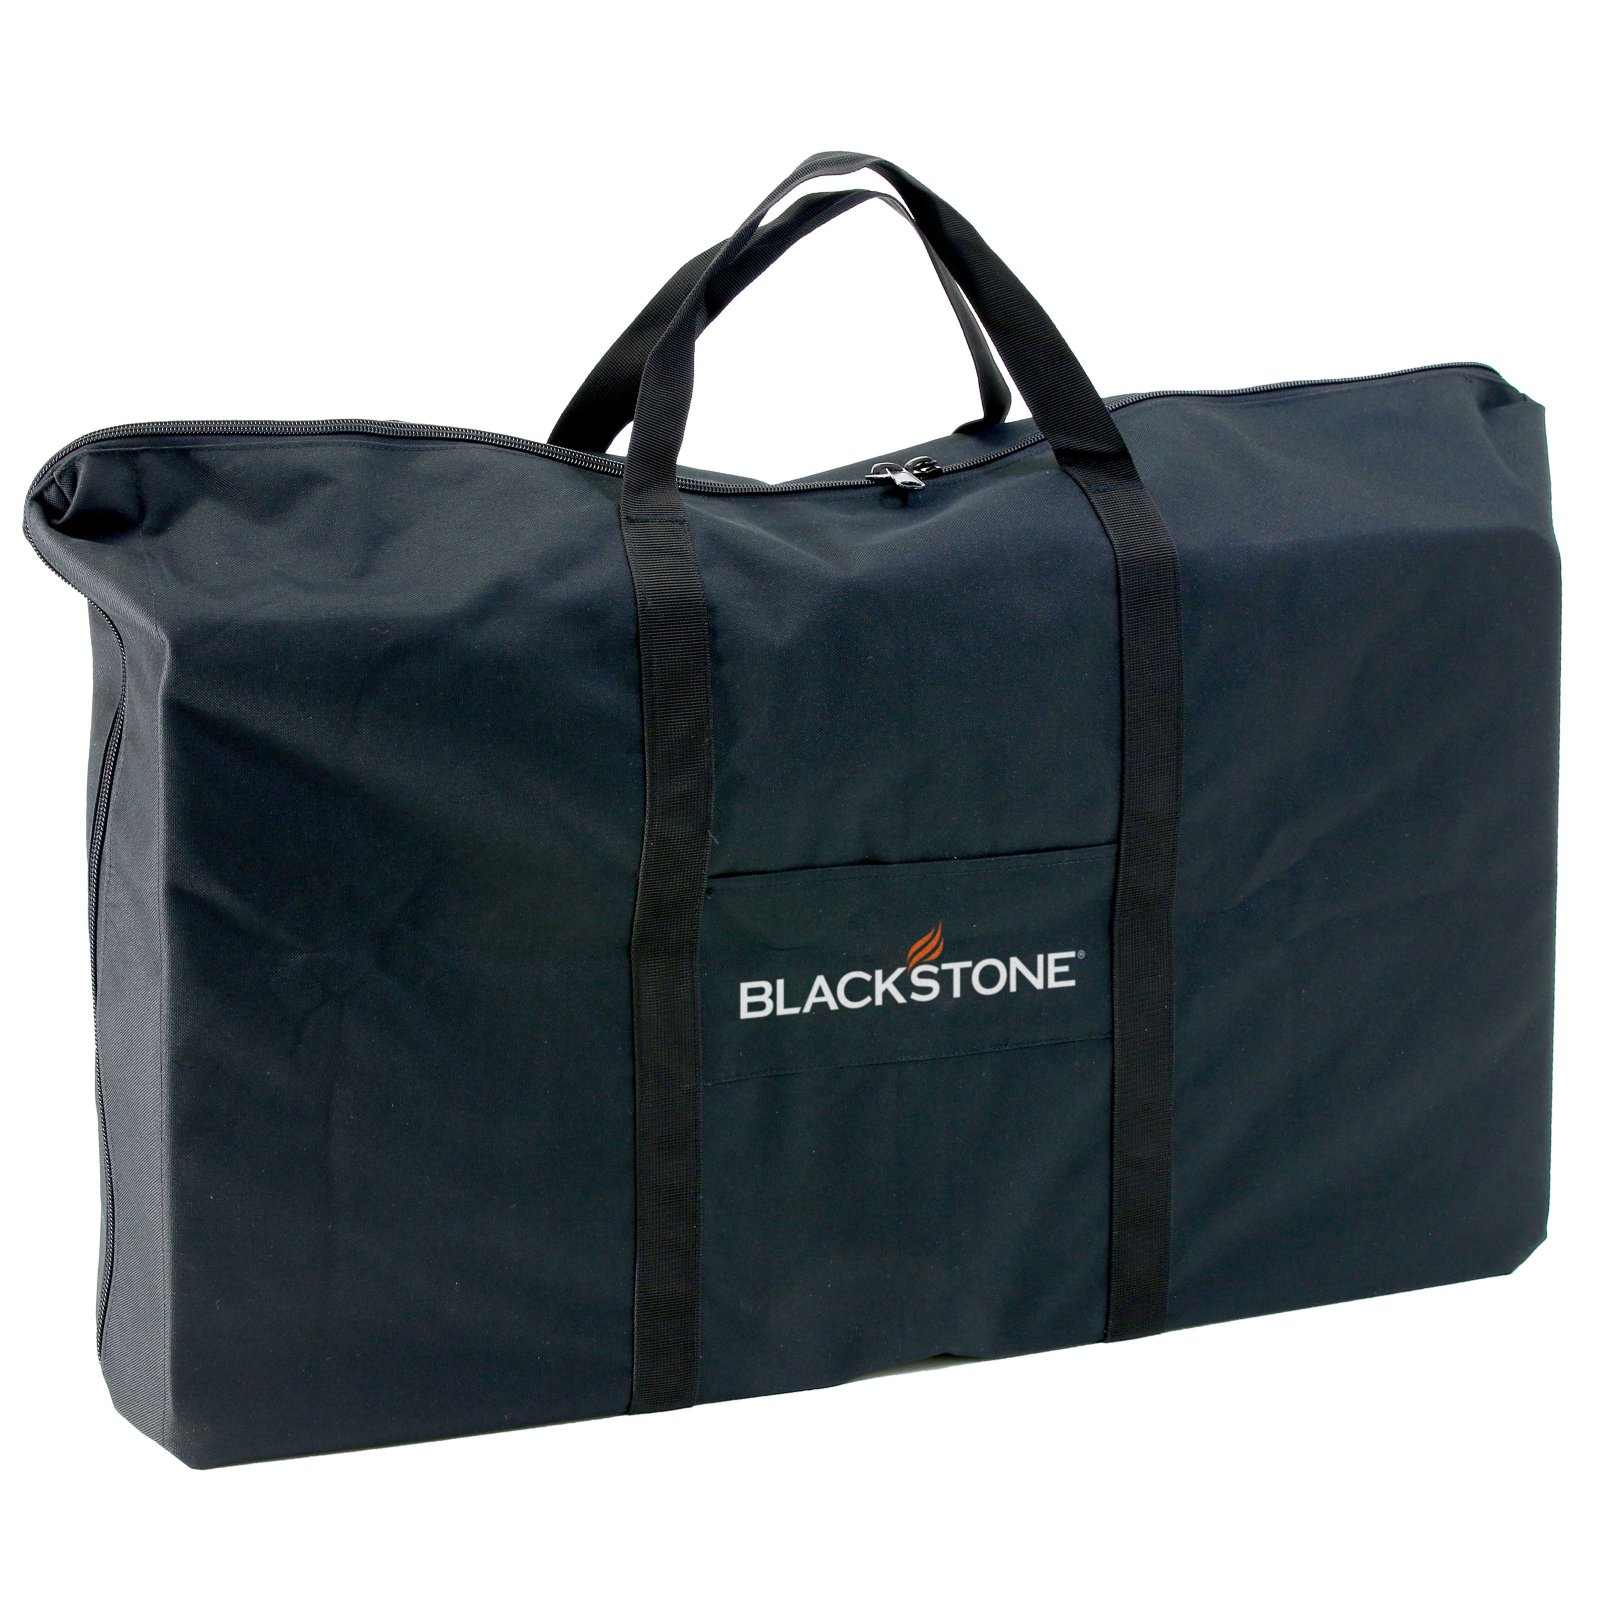 Blackstone Grill/Griddle Carry Bag, For 28-Inch Griddle Top or Grill Top - image 1 of 4